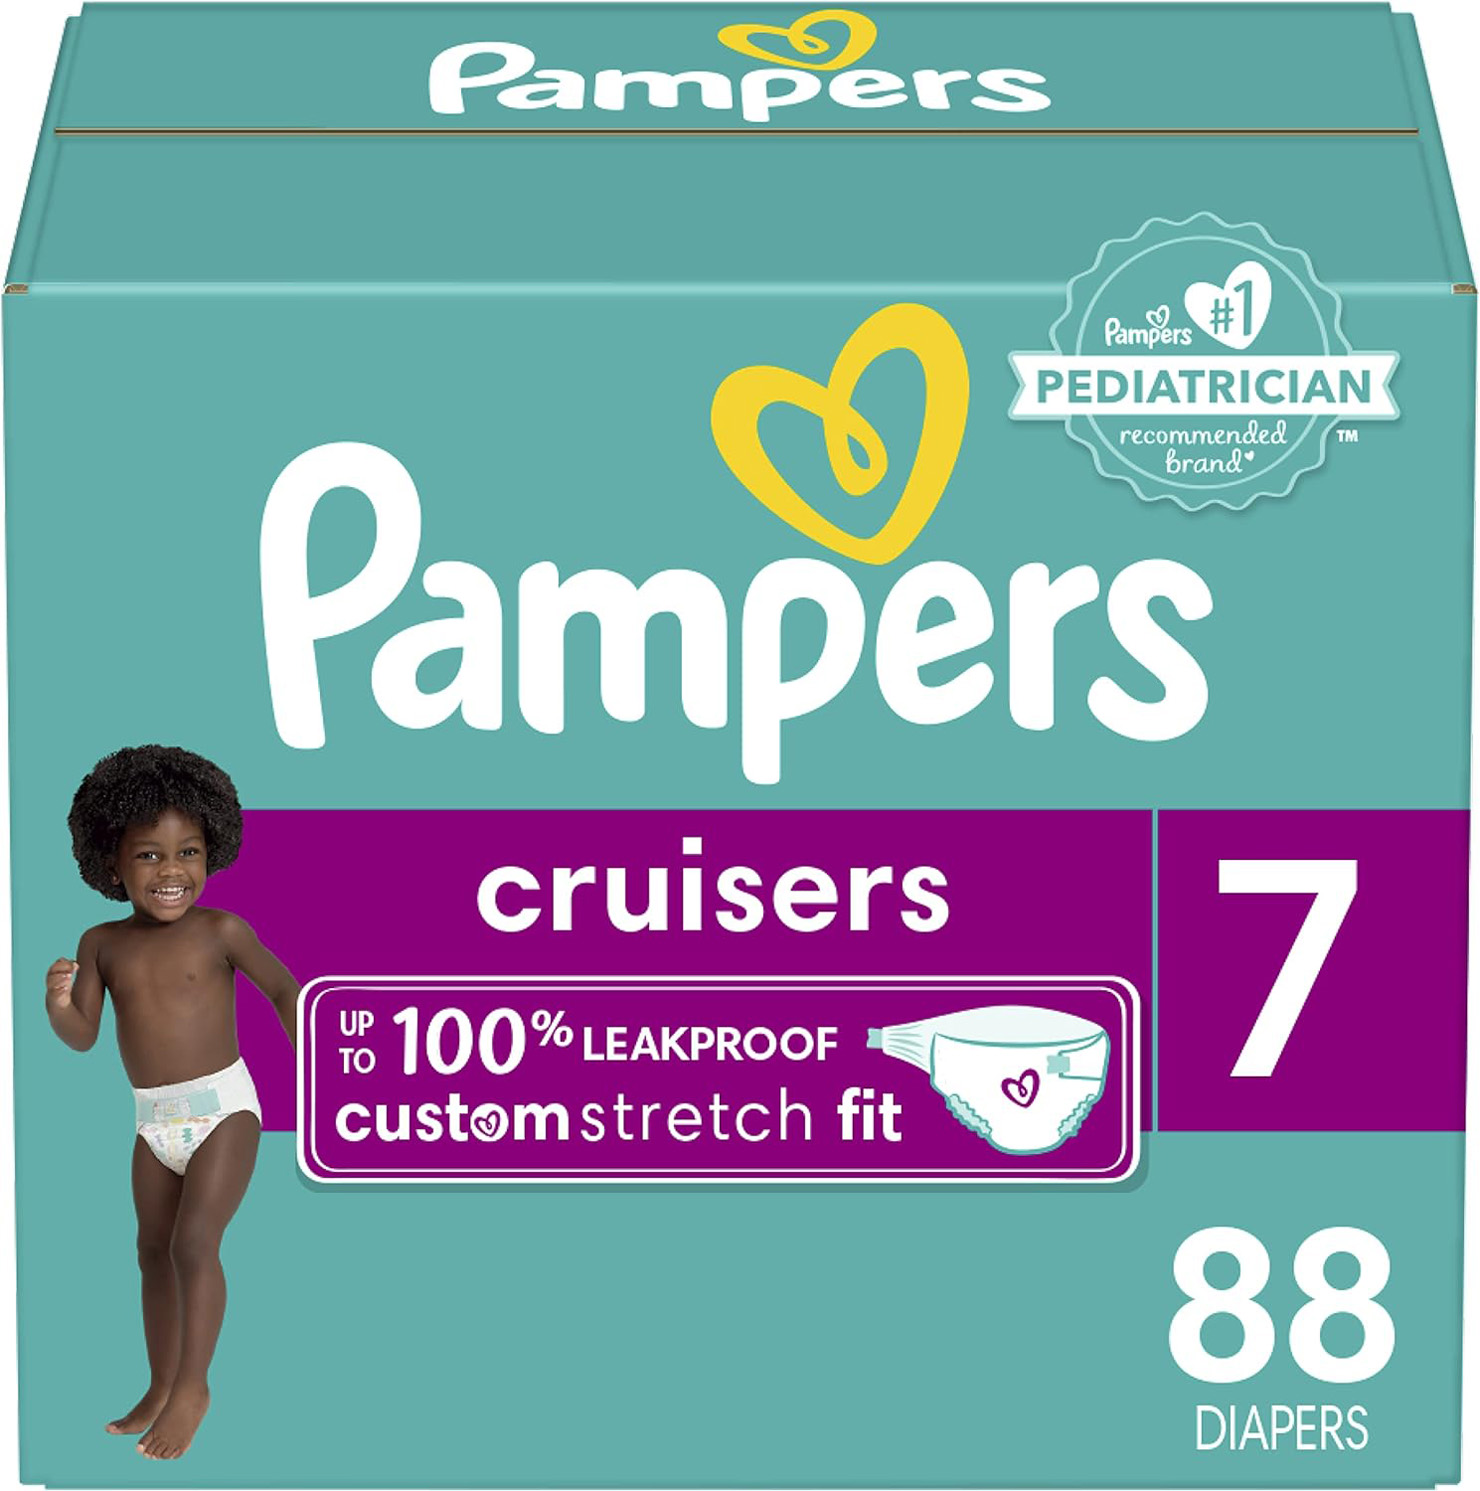 Pampers Cruisers Diapers Size 7, 88 count – Disposable Diapers